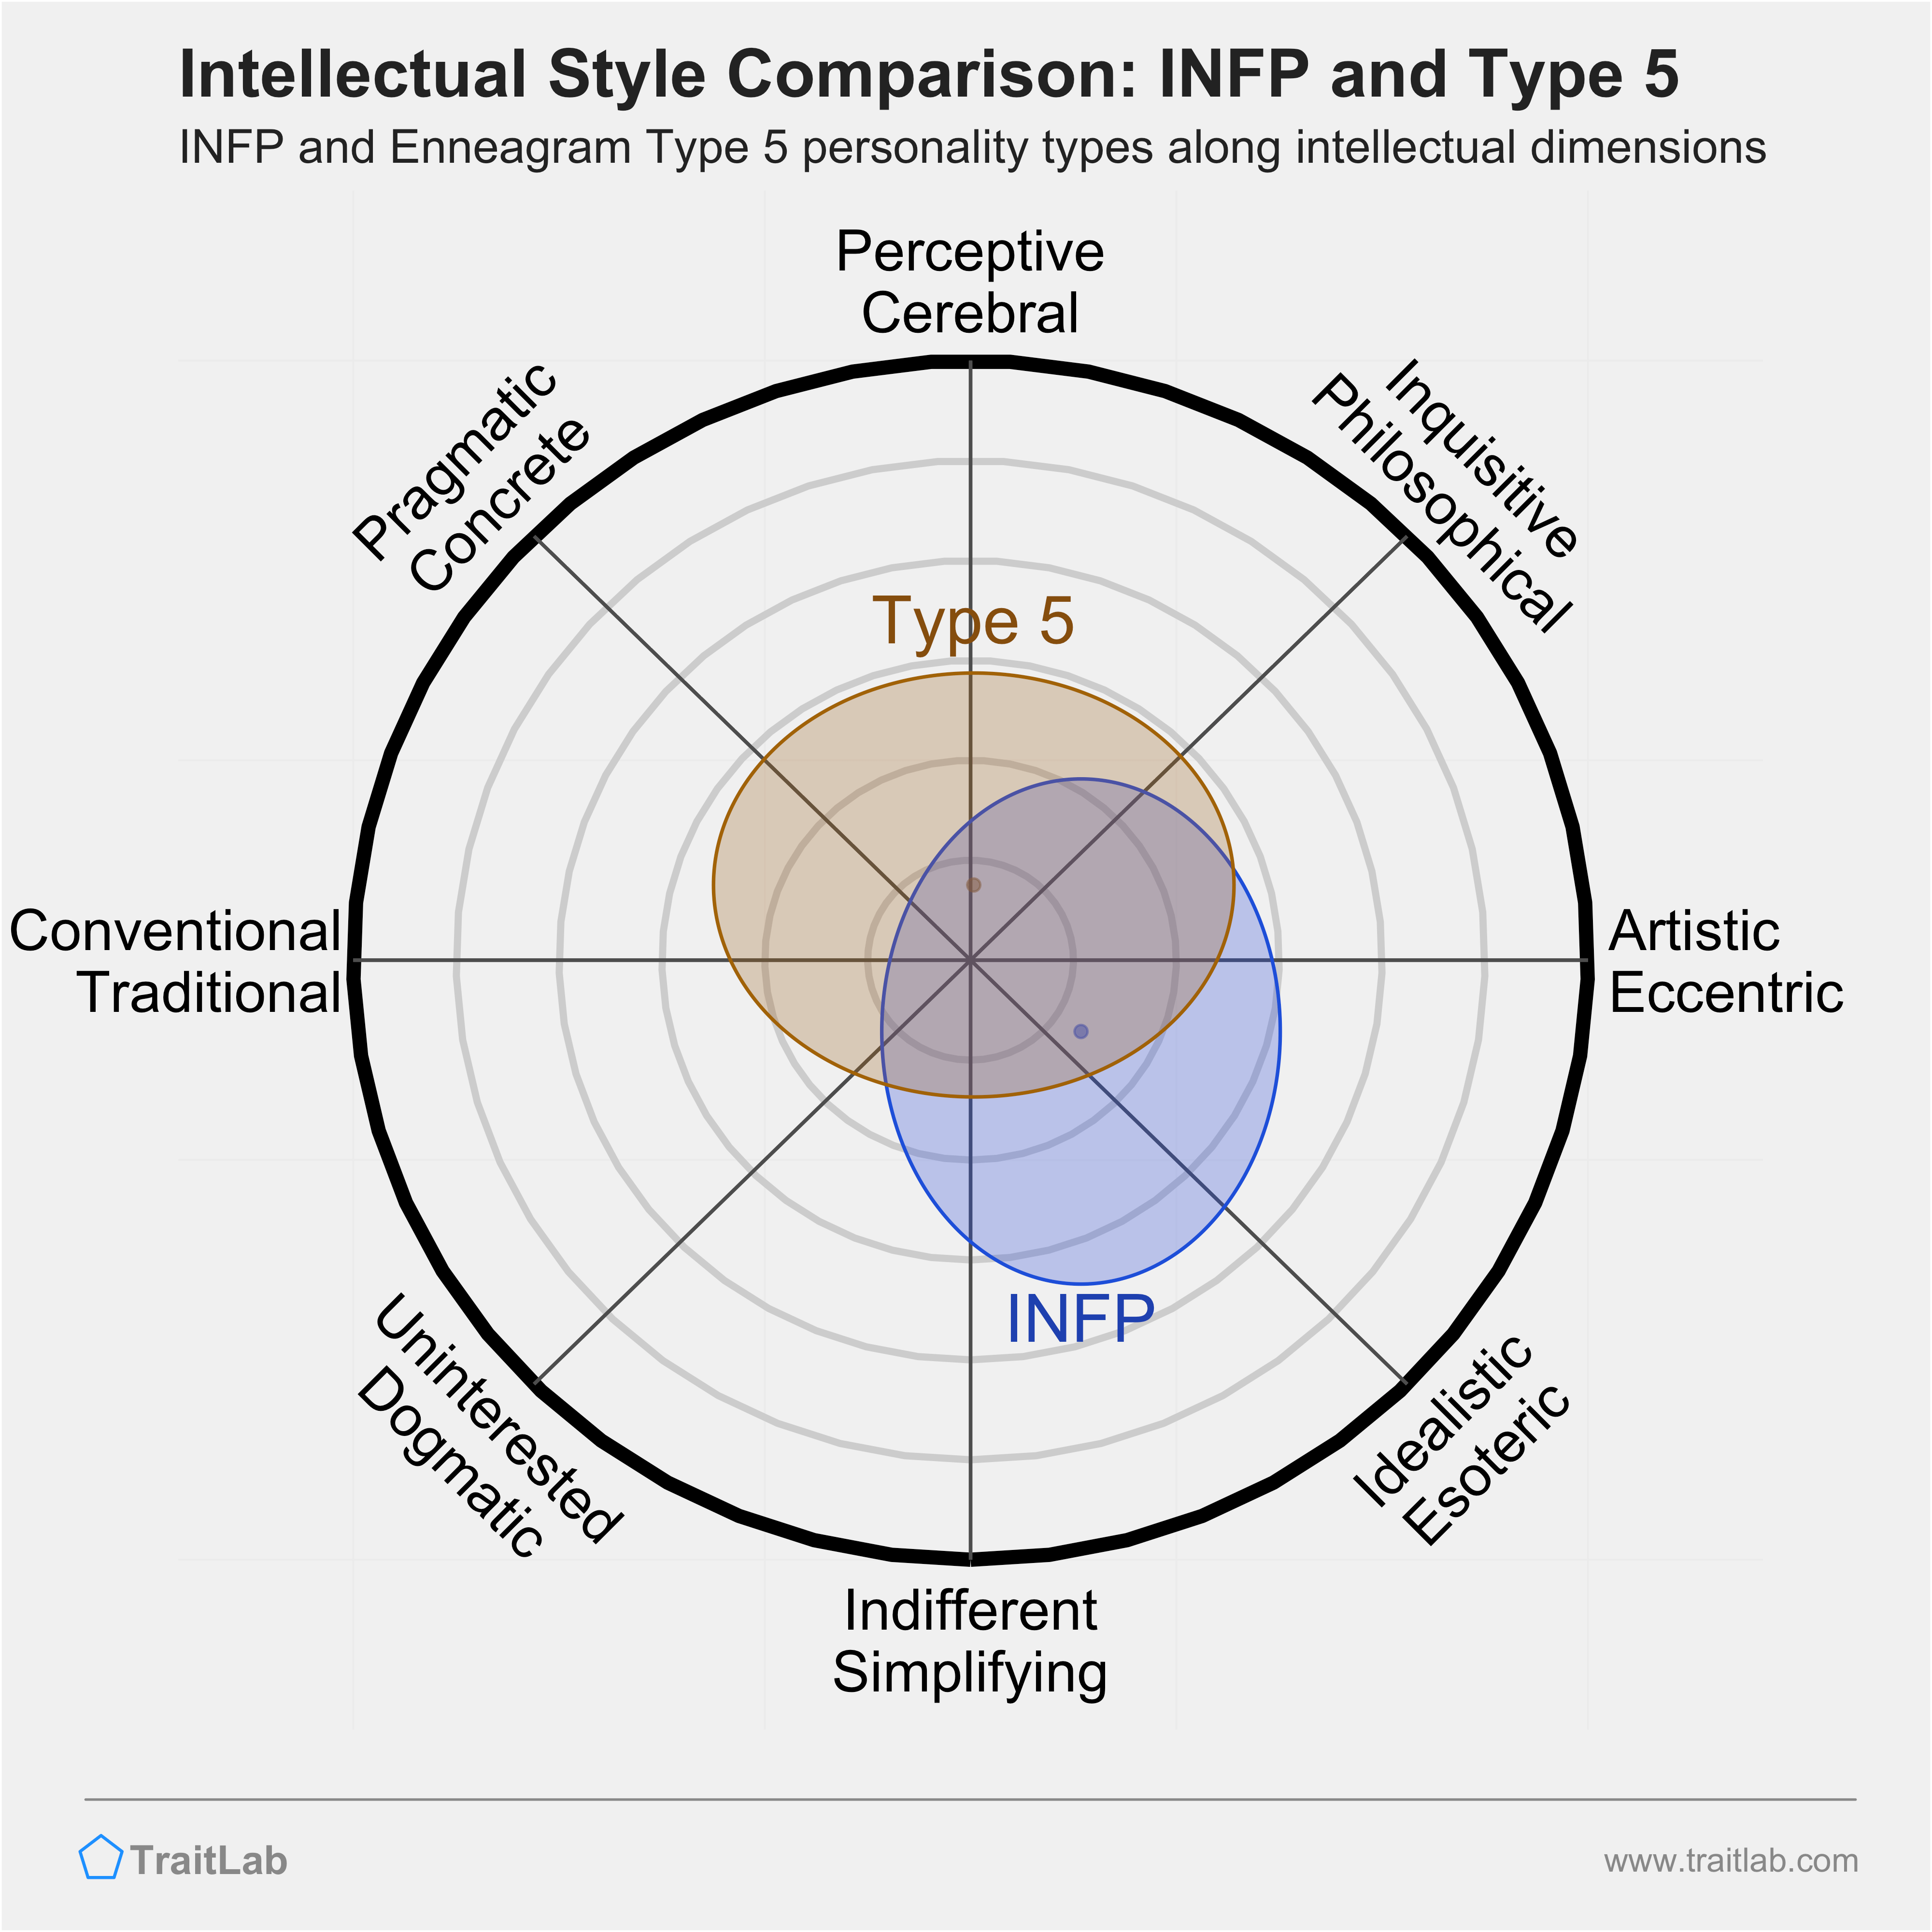 INFP and Type 5 comparison across intellectual dimensions